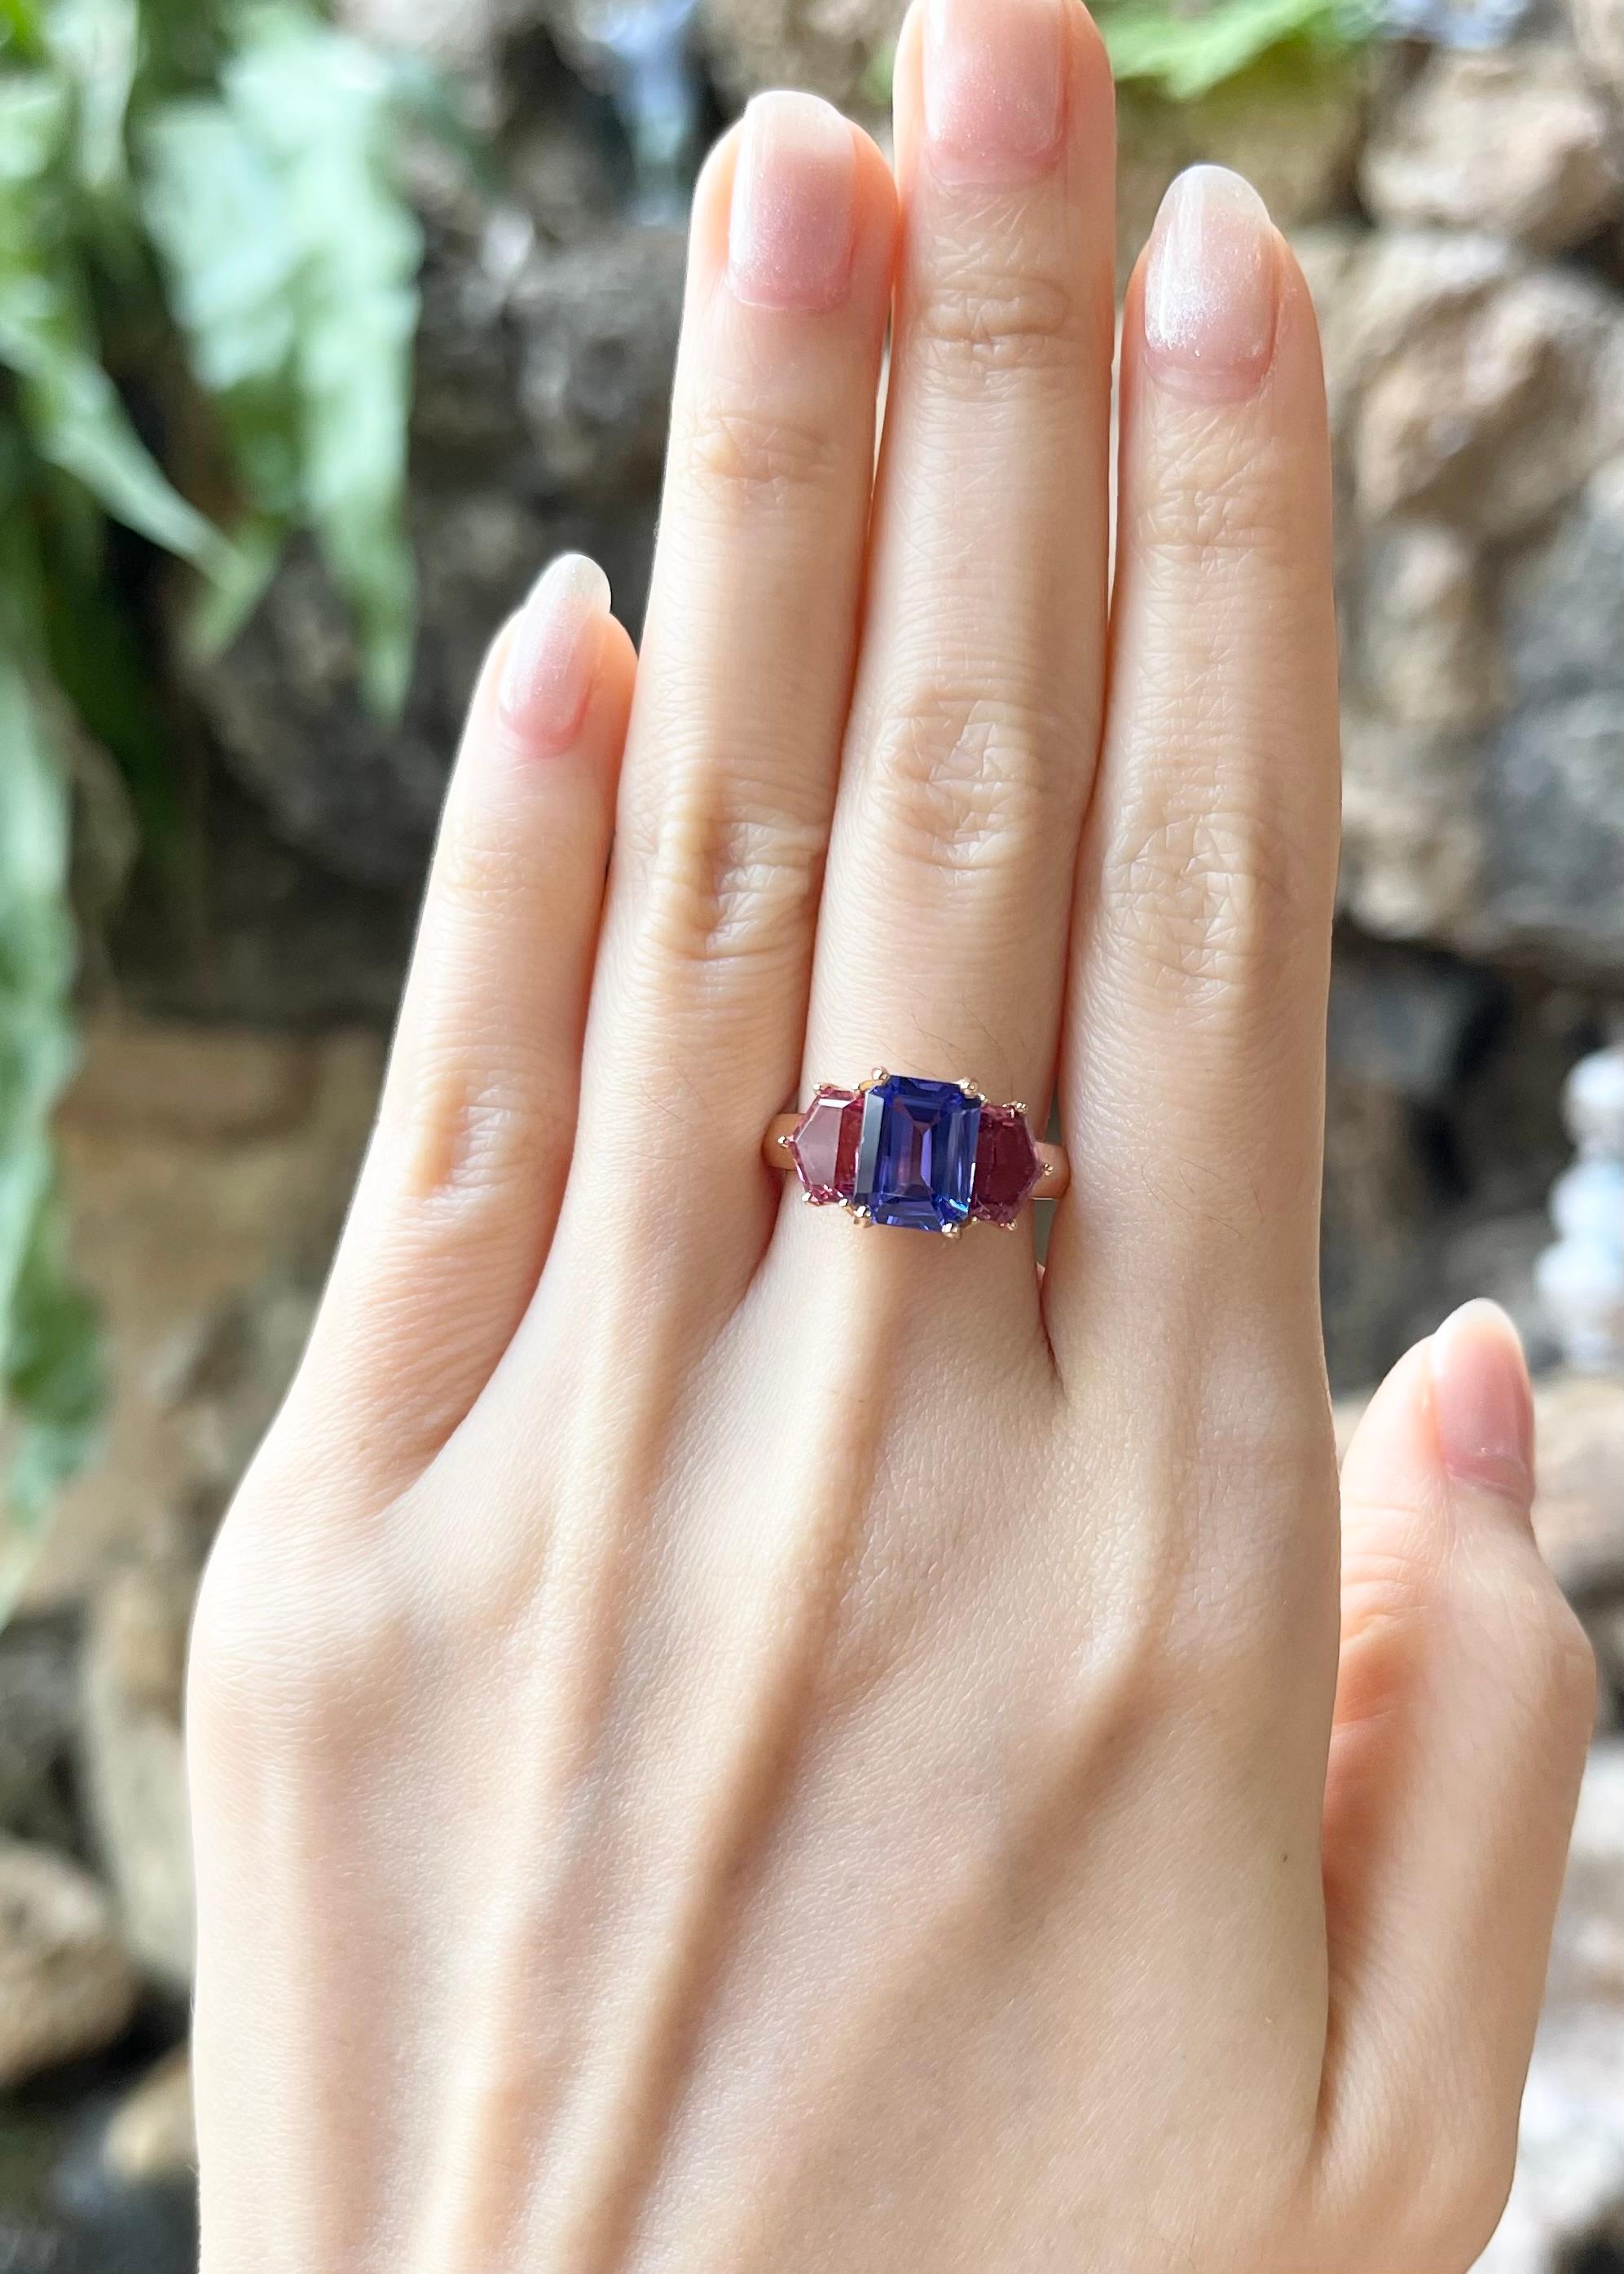 Tanzanite 2.09 carats and Pink Tourmaline 1.92 carats Ring set in 18K Rose Gold Settings

Width:  1.7 cm 
Length: 0.8 cm
Ring Size: 53
Total Weight: 6.2 grams

